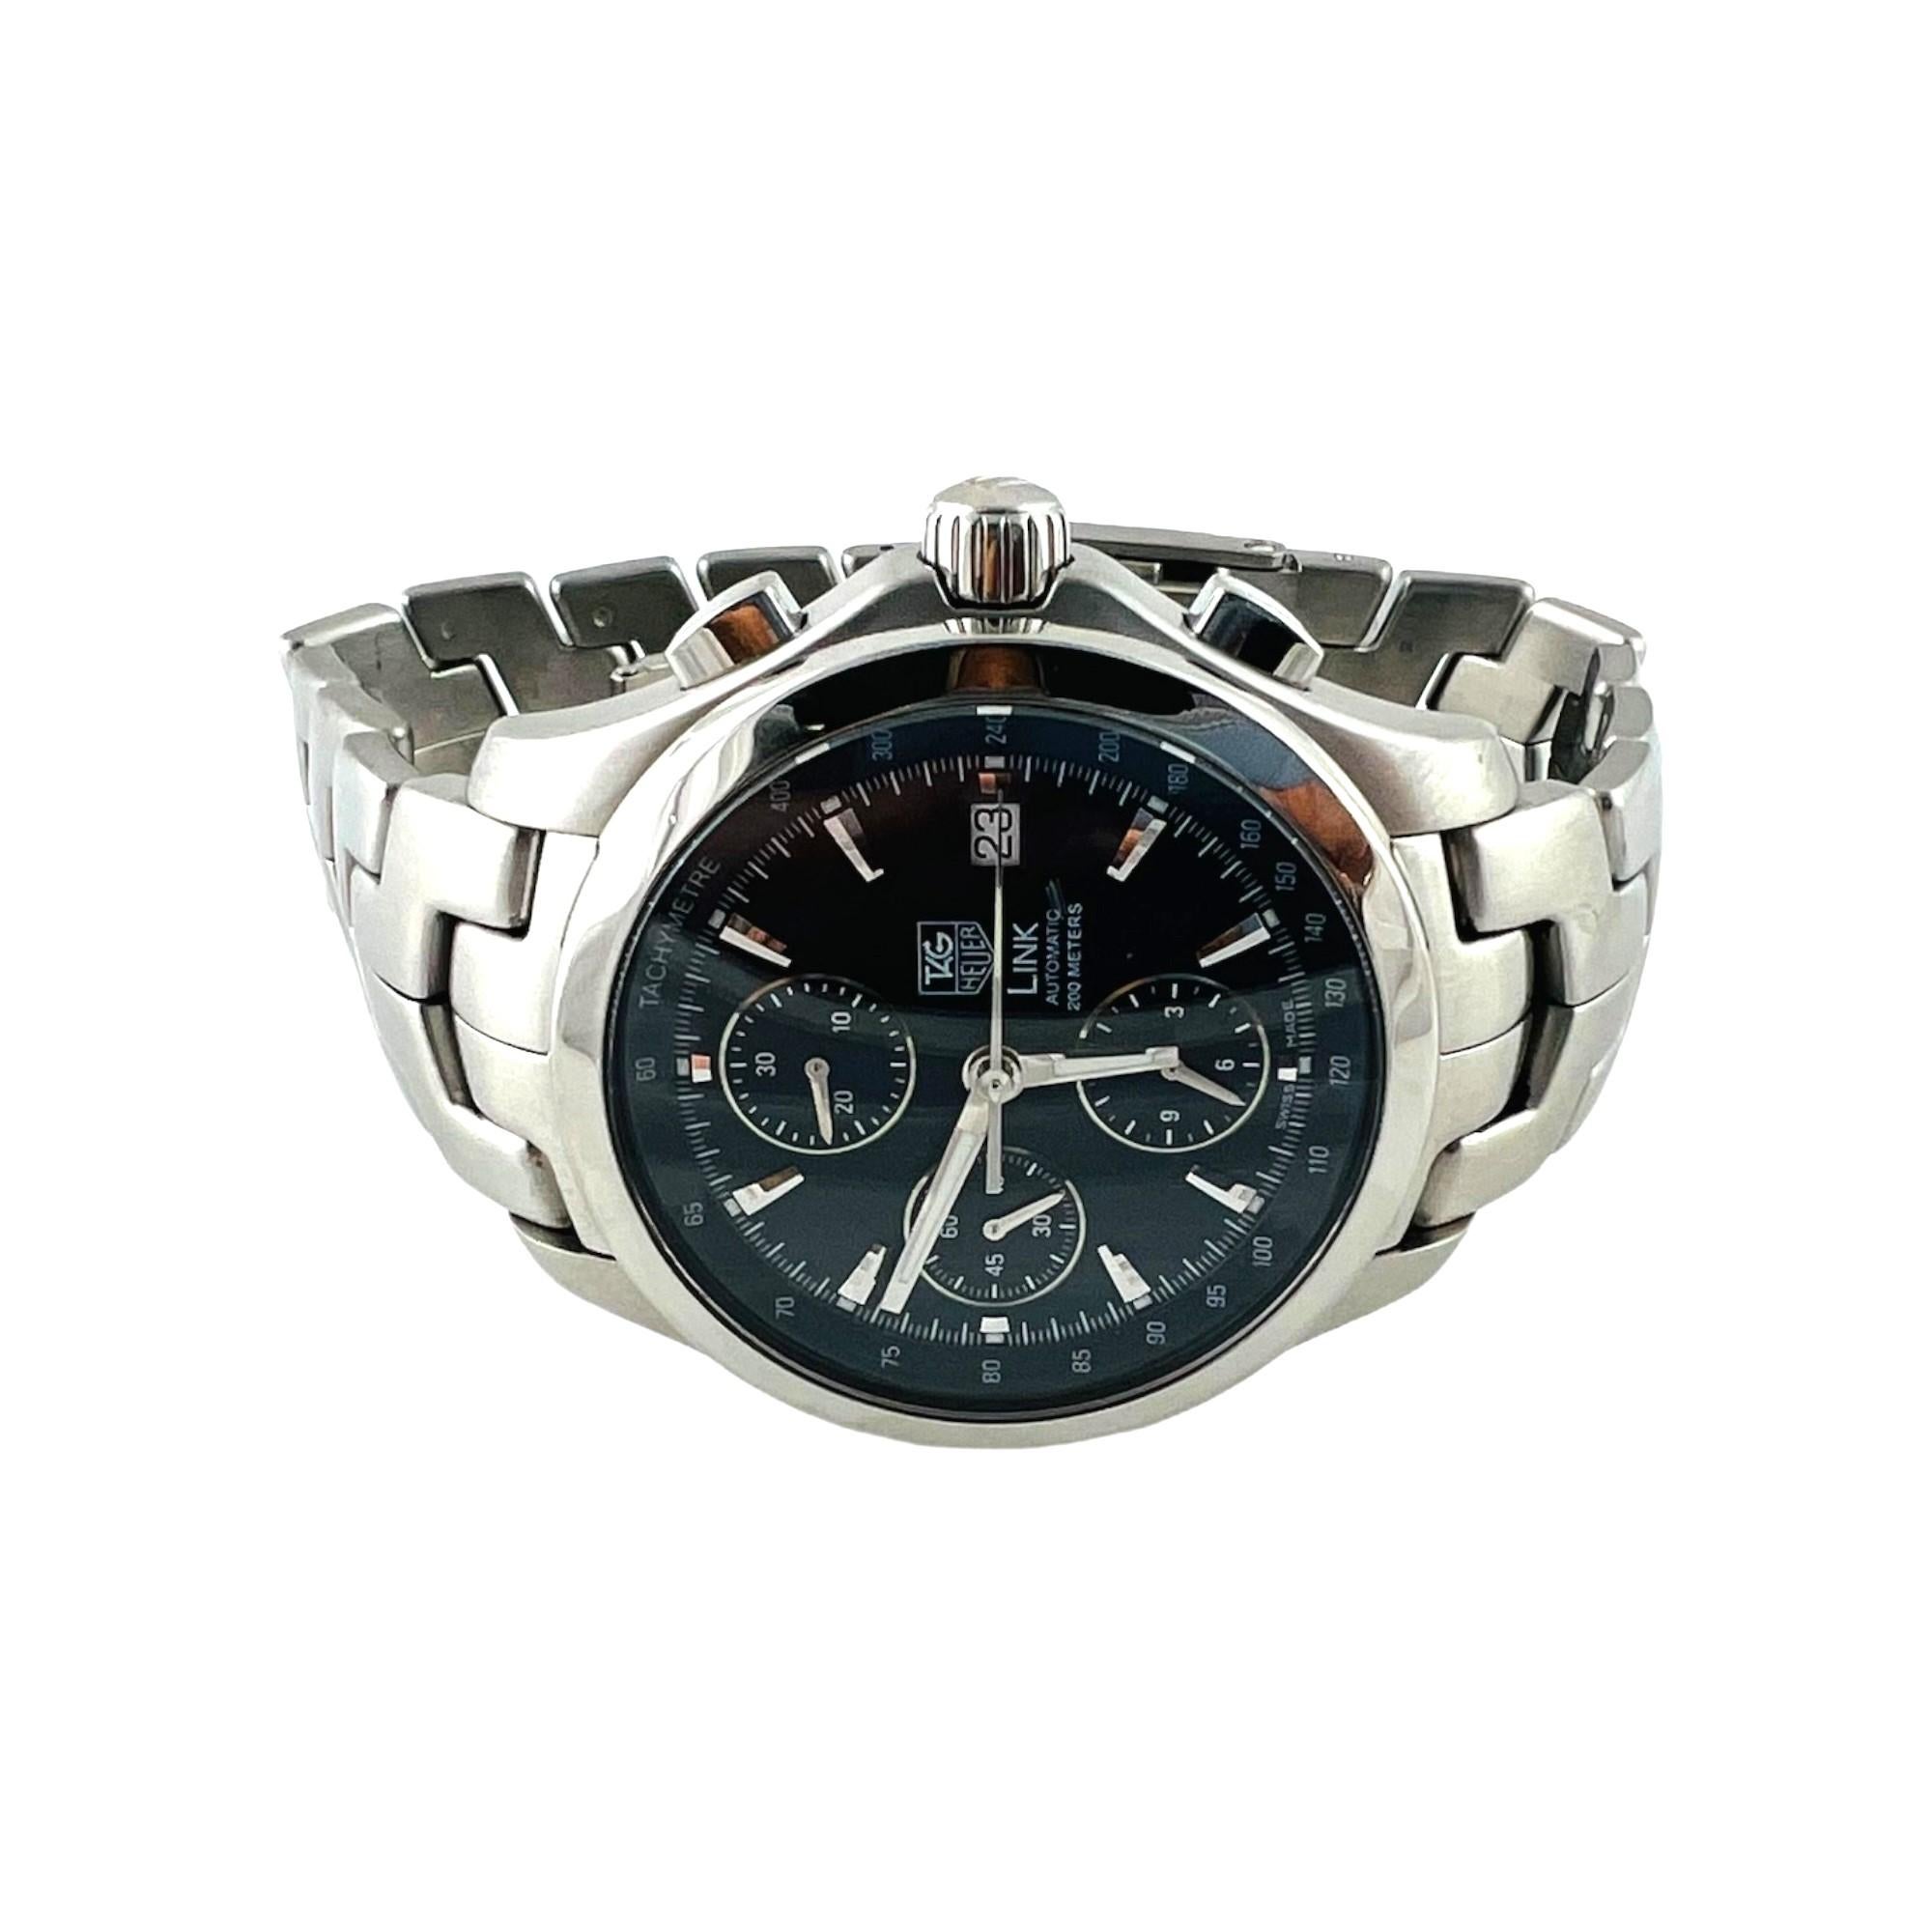 TAG Heuer Men's Link Watch

Model: CJF2112
Serial: GR6715

Tag Heuer Automatic LINK watch - self winding movement

Chronograph with date

Blue Dial

Stainless steel case and band

Band fits up to 7 3/4